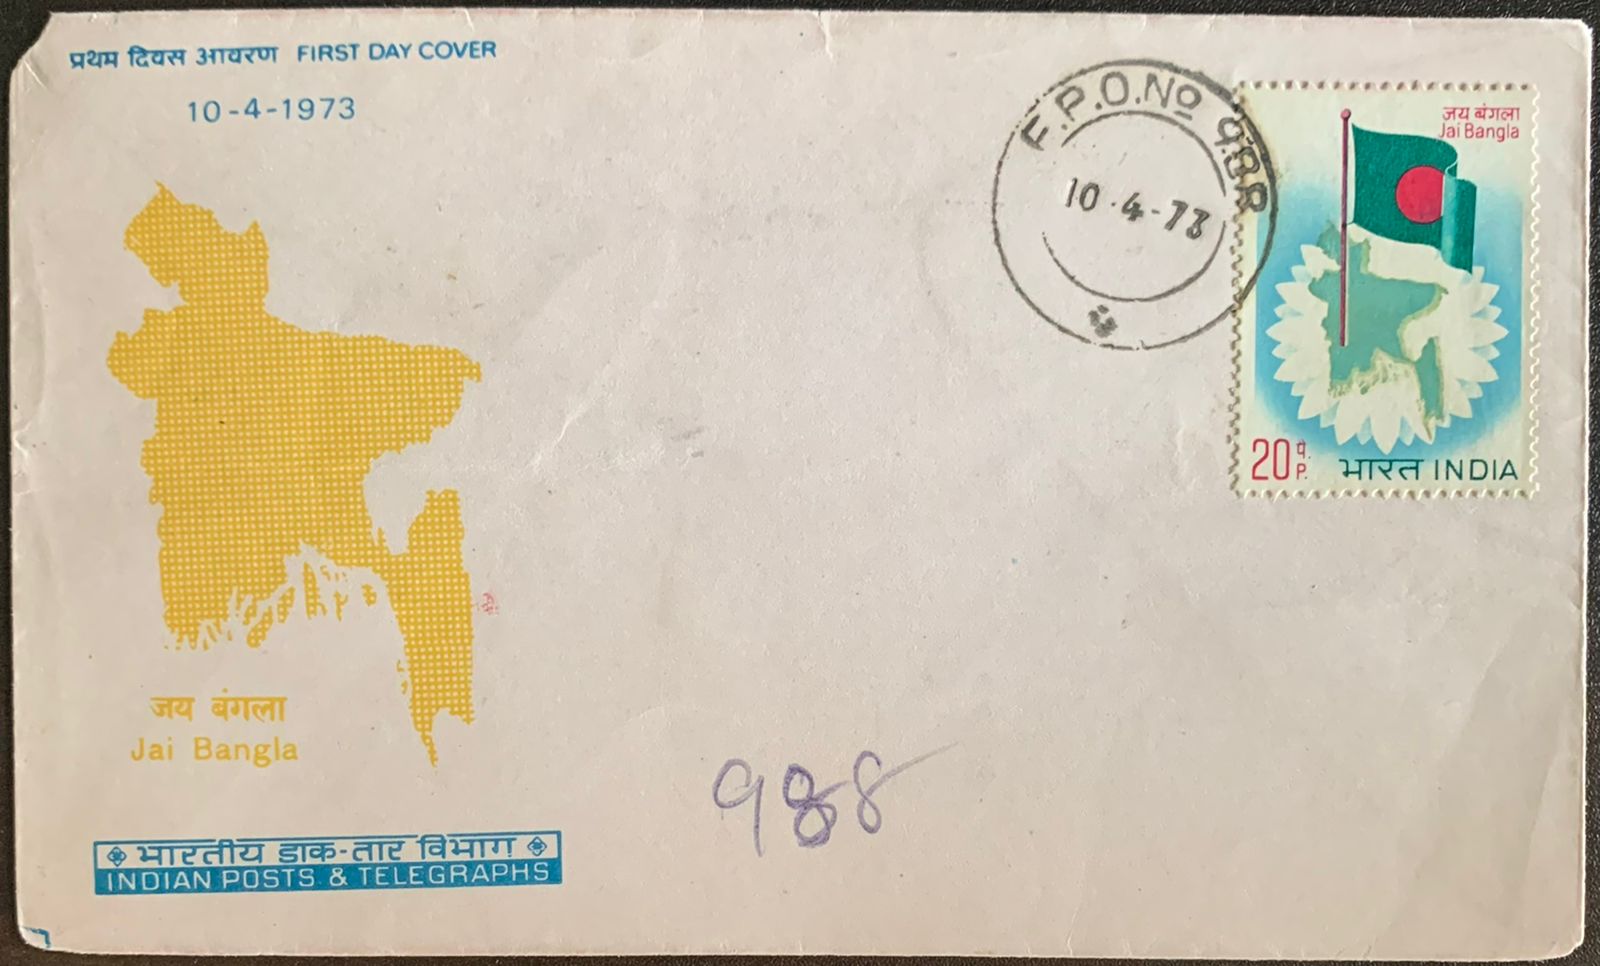 India 1973 Jai Bangla FDC with Gold MISSING ERROR Cancelled in FPO 988 First Day Cover